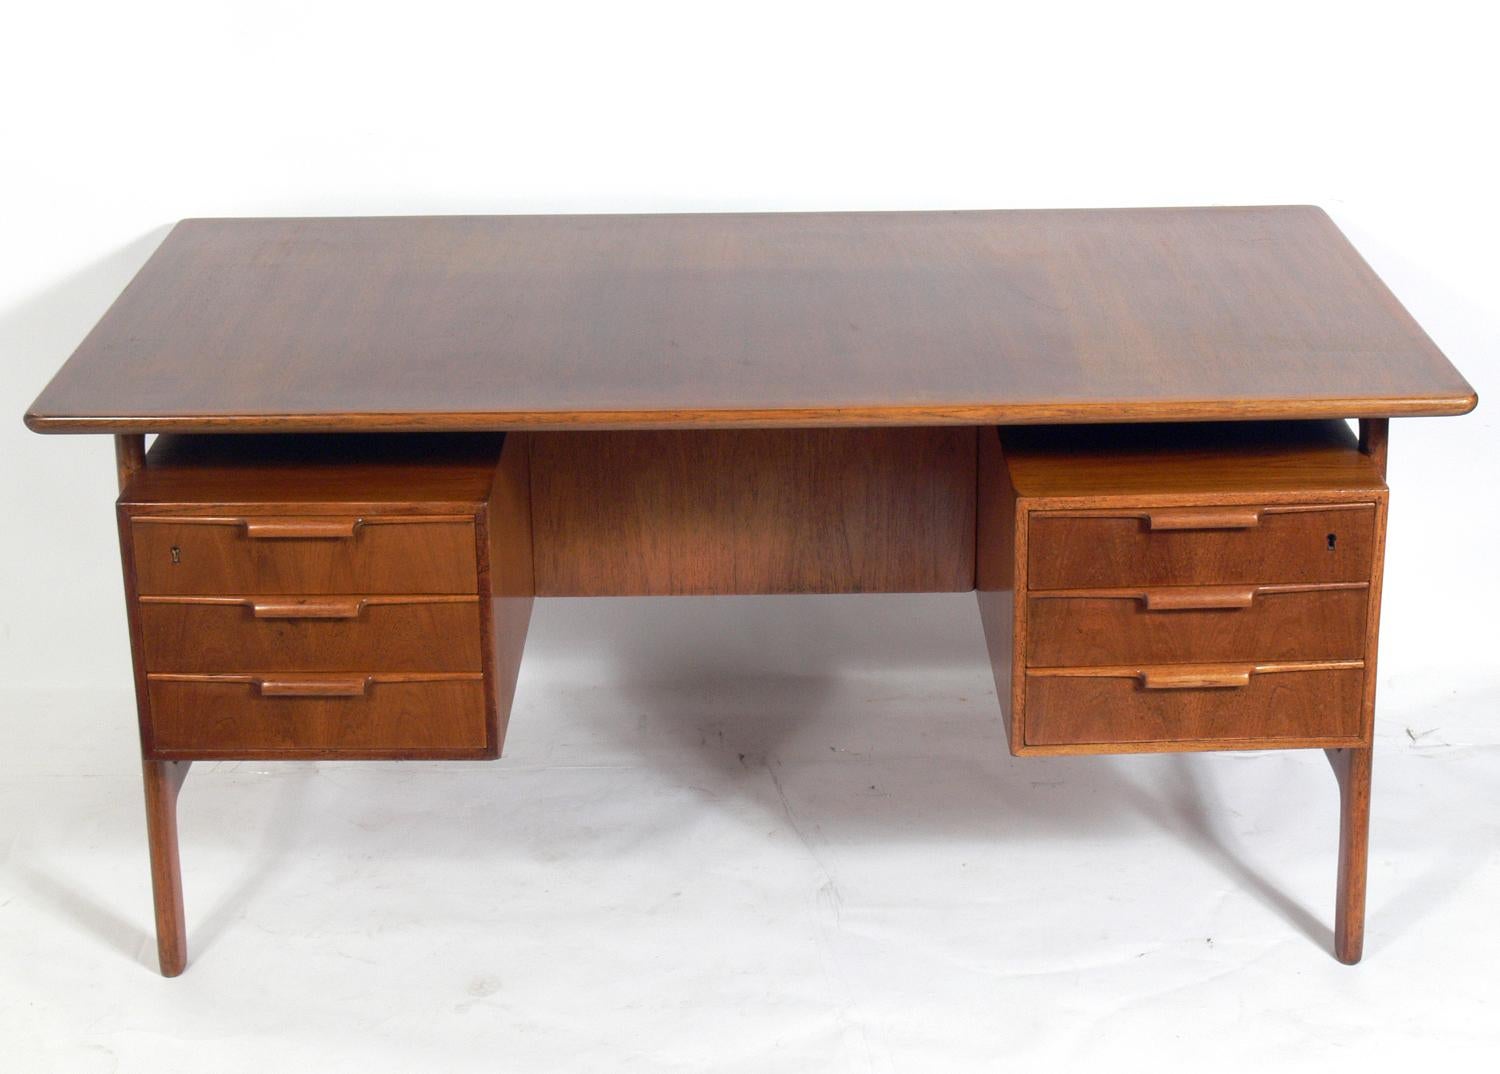 Danish modern teak fesk designed by Gunni Oman for Omann Juns Møbelfabrik, Denmark, circa 1960s. Impressed signature underneath. It is a versatile size and can be floated in a room or used as a partners desk, as it is finished on the back side. It